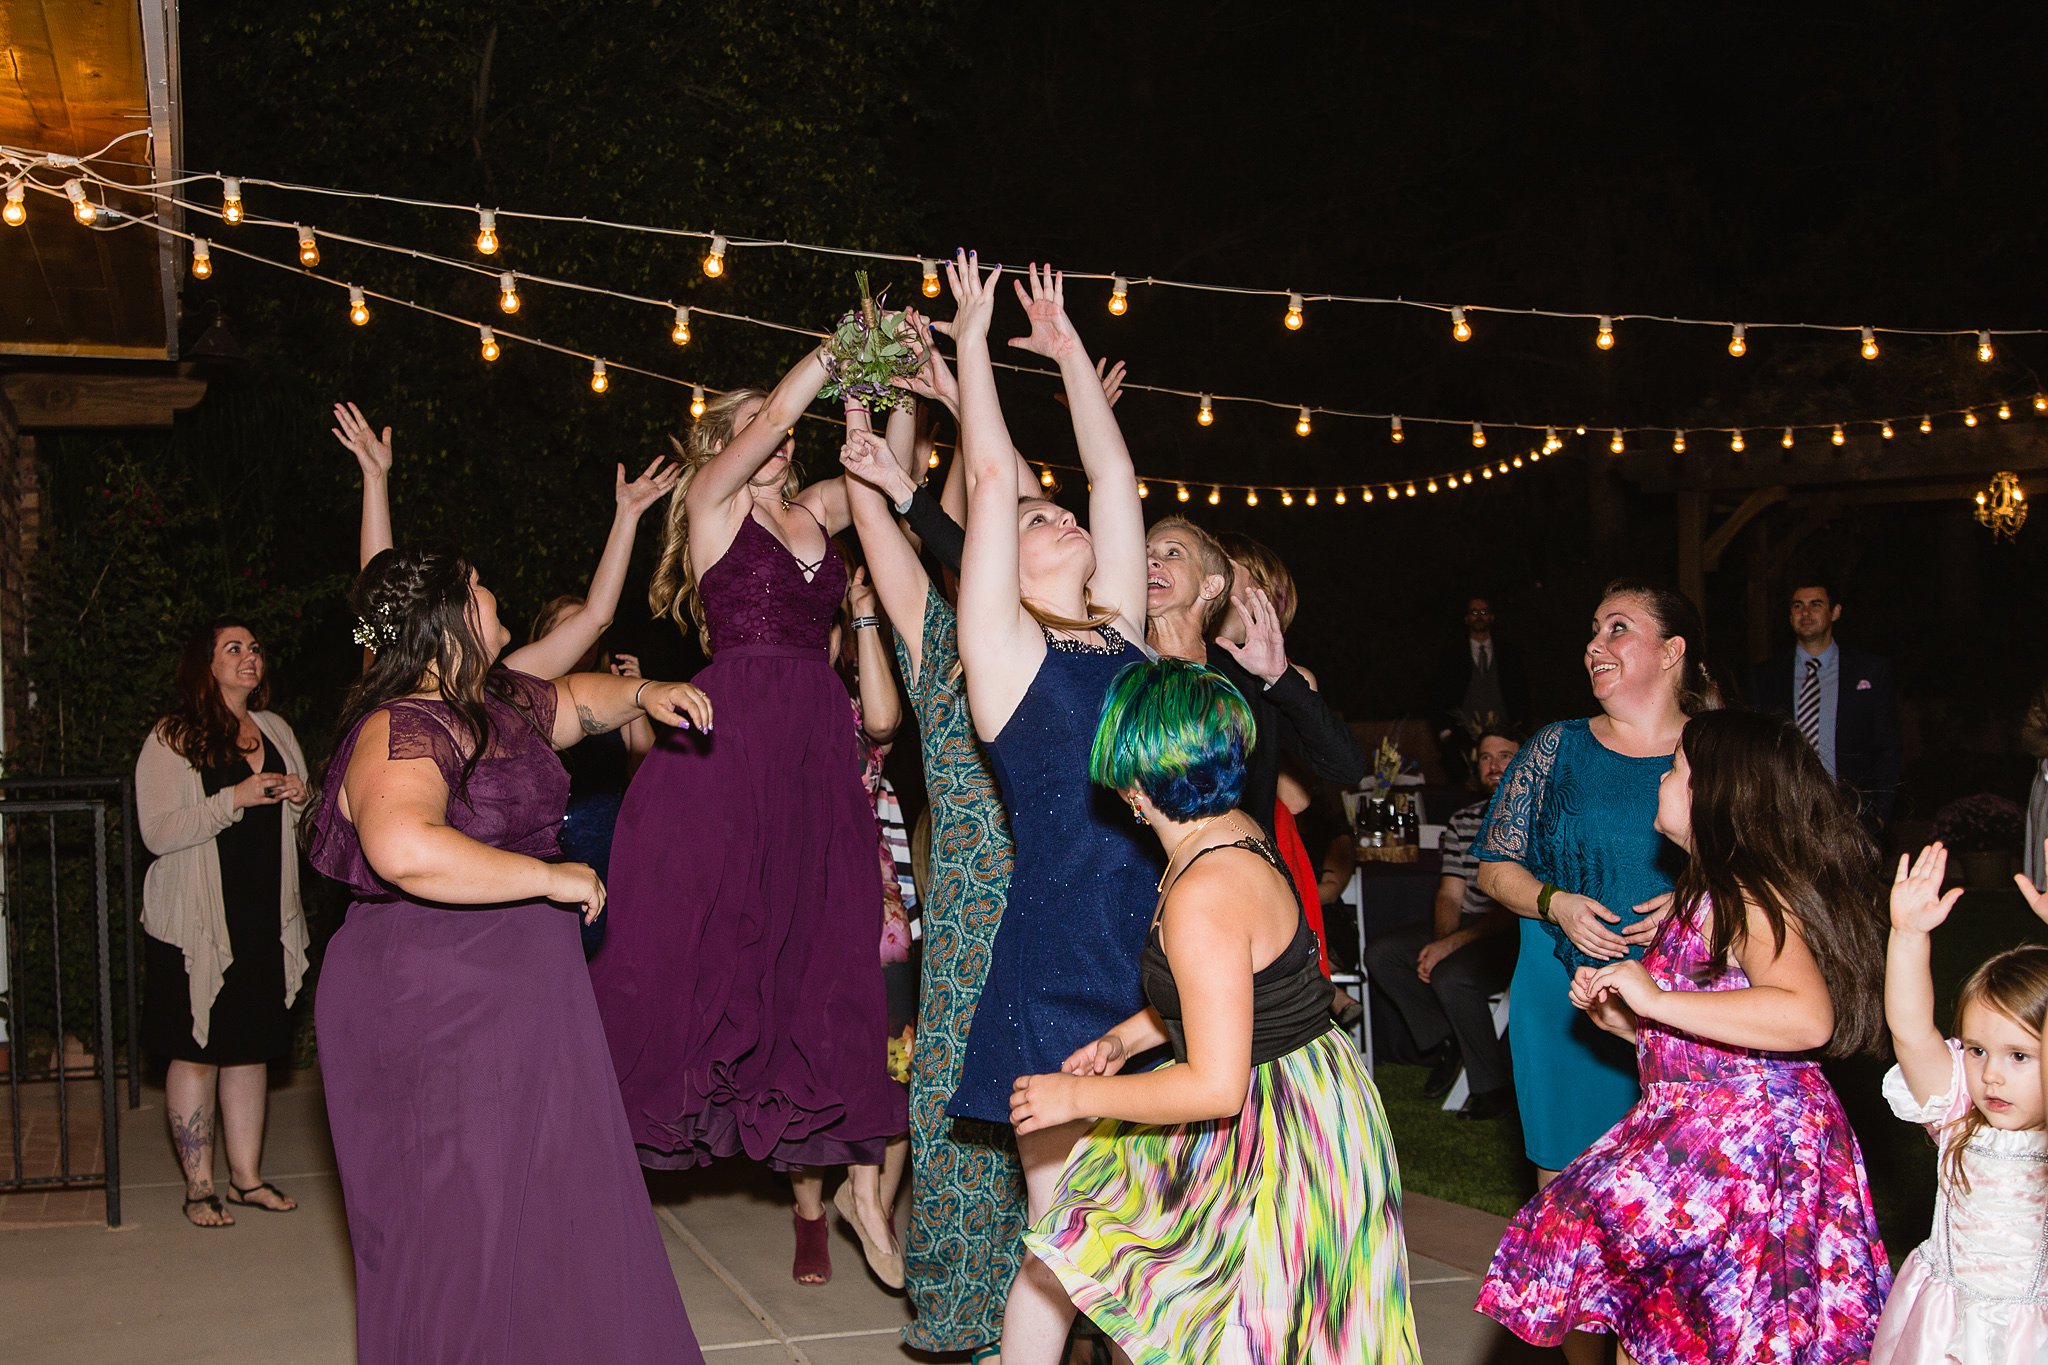 Guests catching bouquet at wedding reception by wedding photographer PMA Photography.